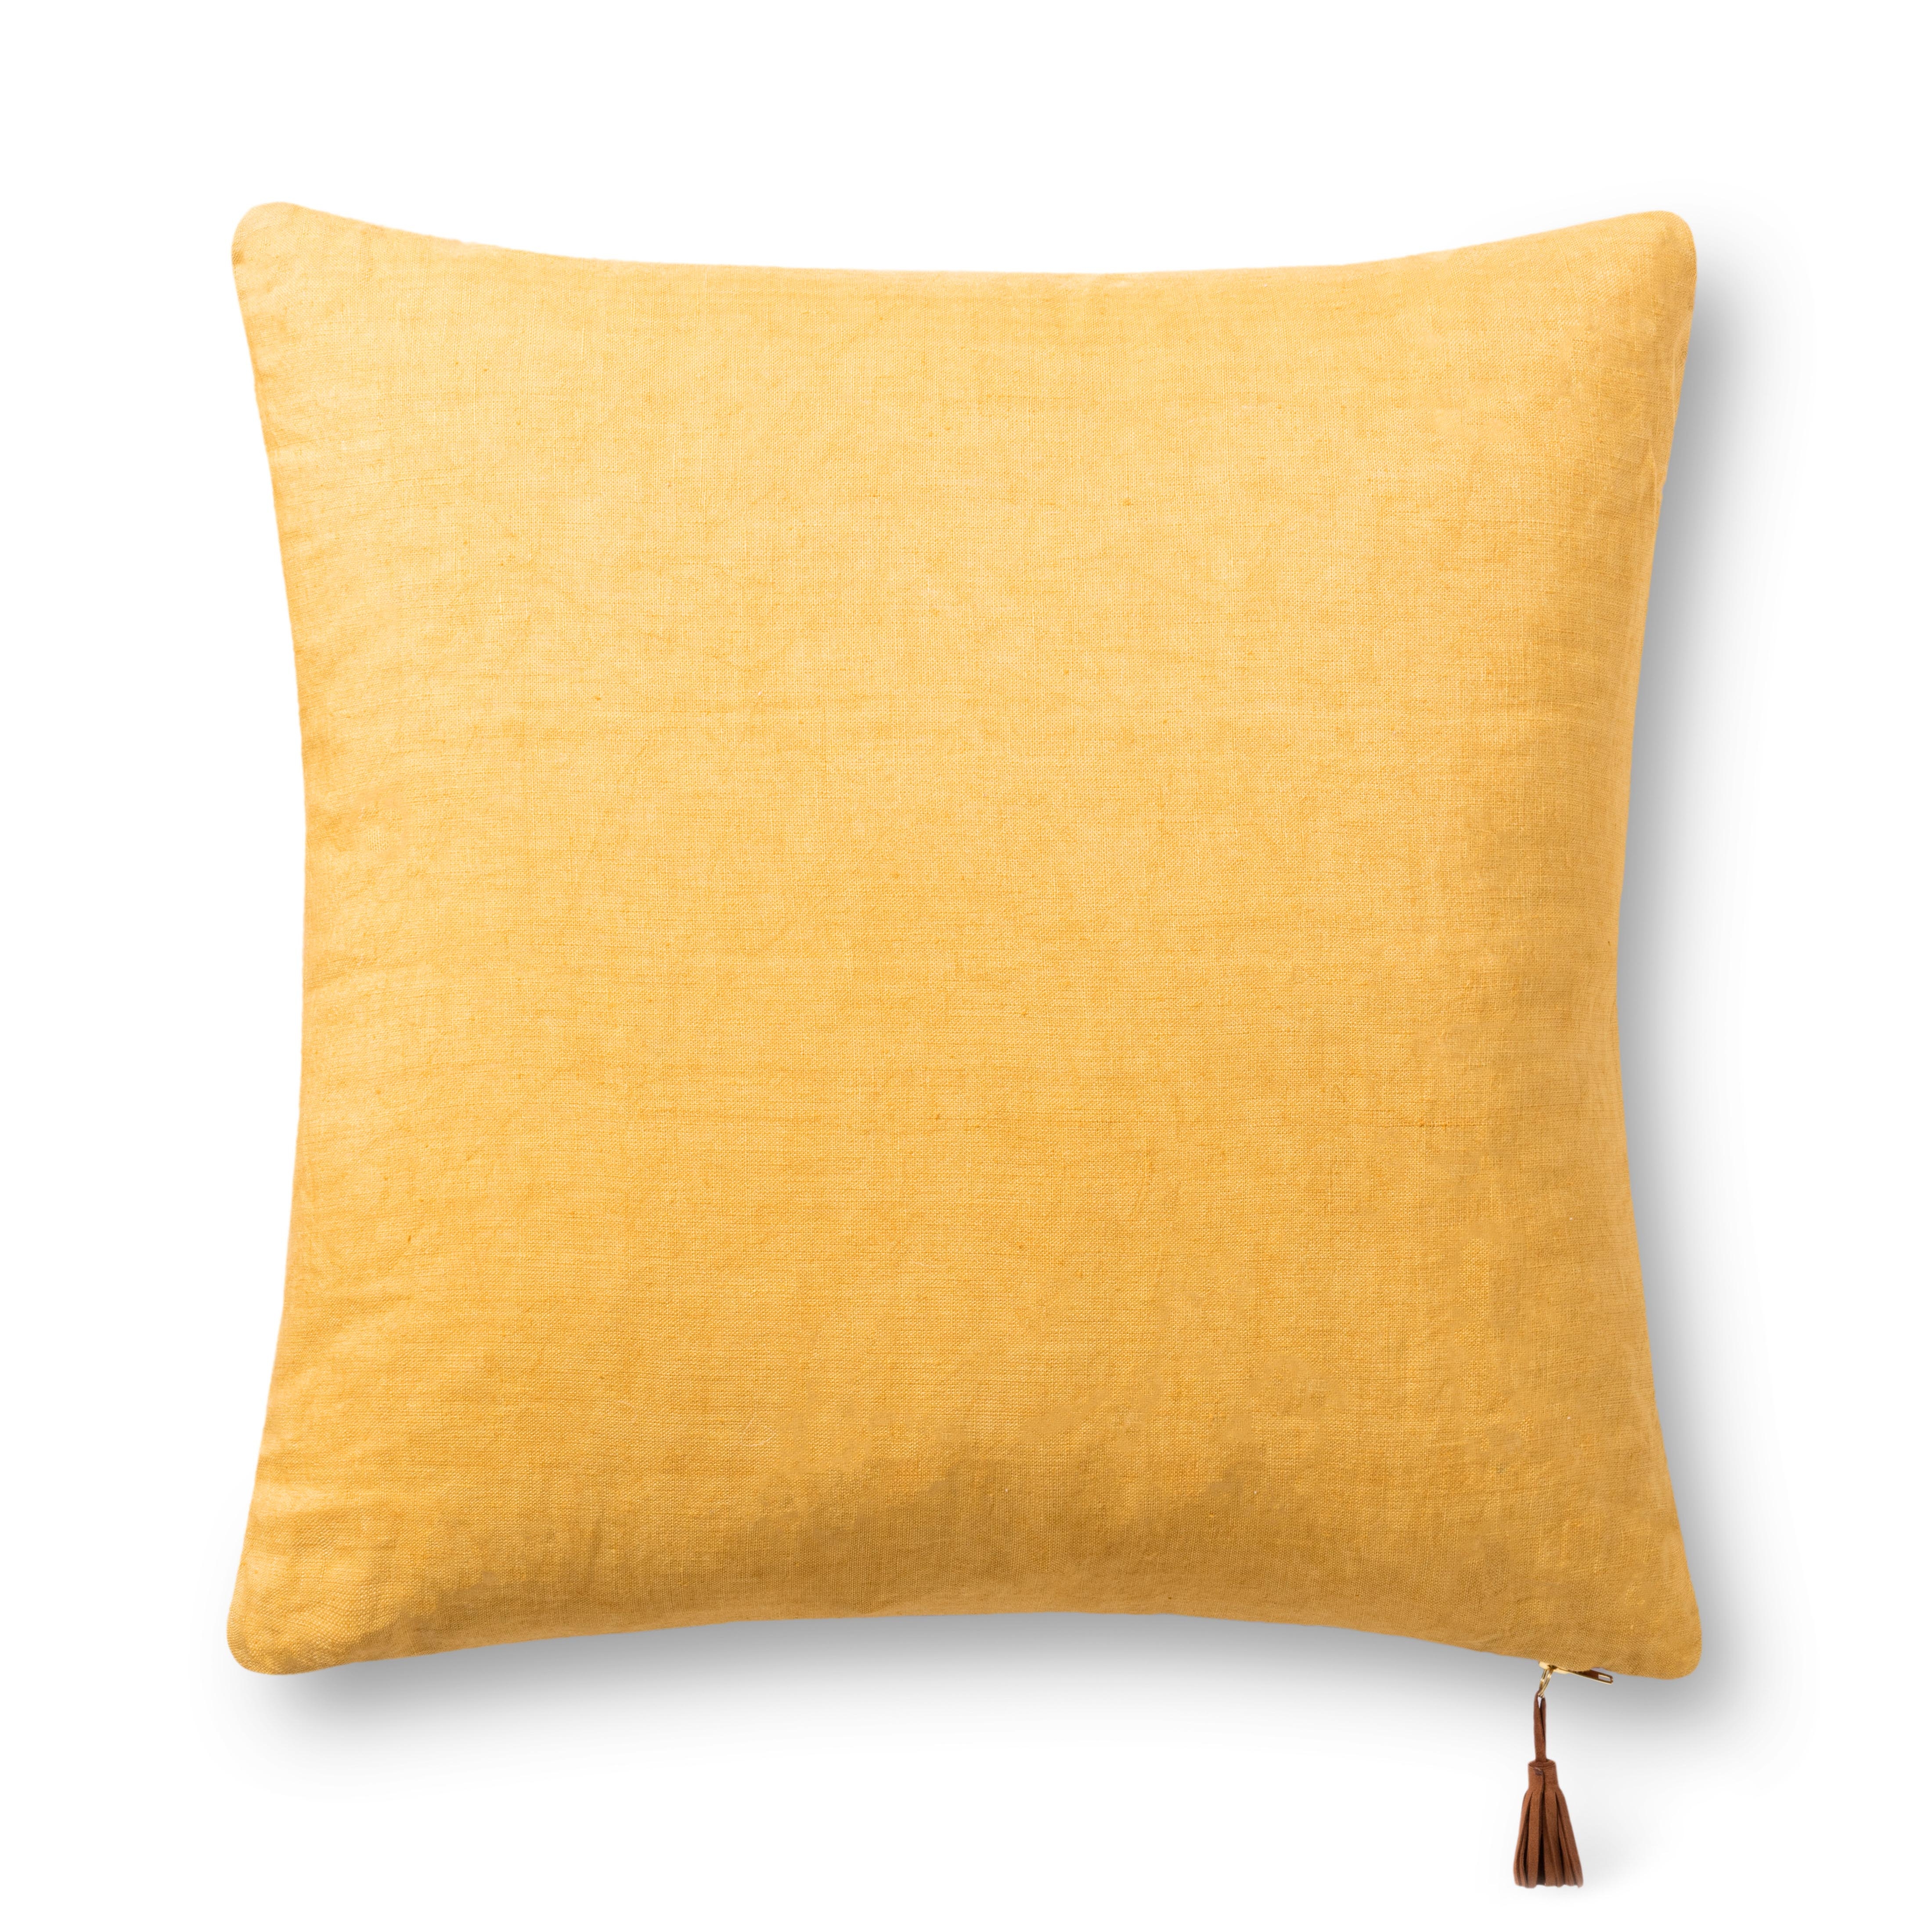 PILLOWS P1153 RUST / GOLD 22" x 22" Cover Only - Image 1